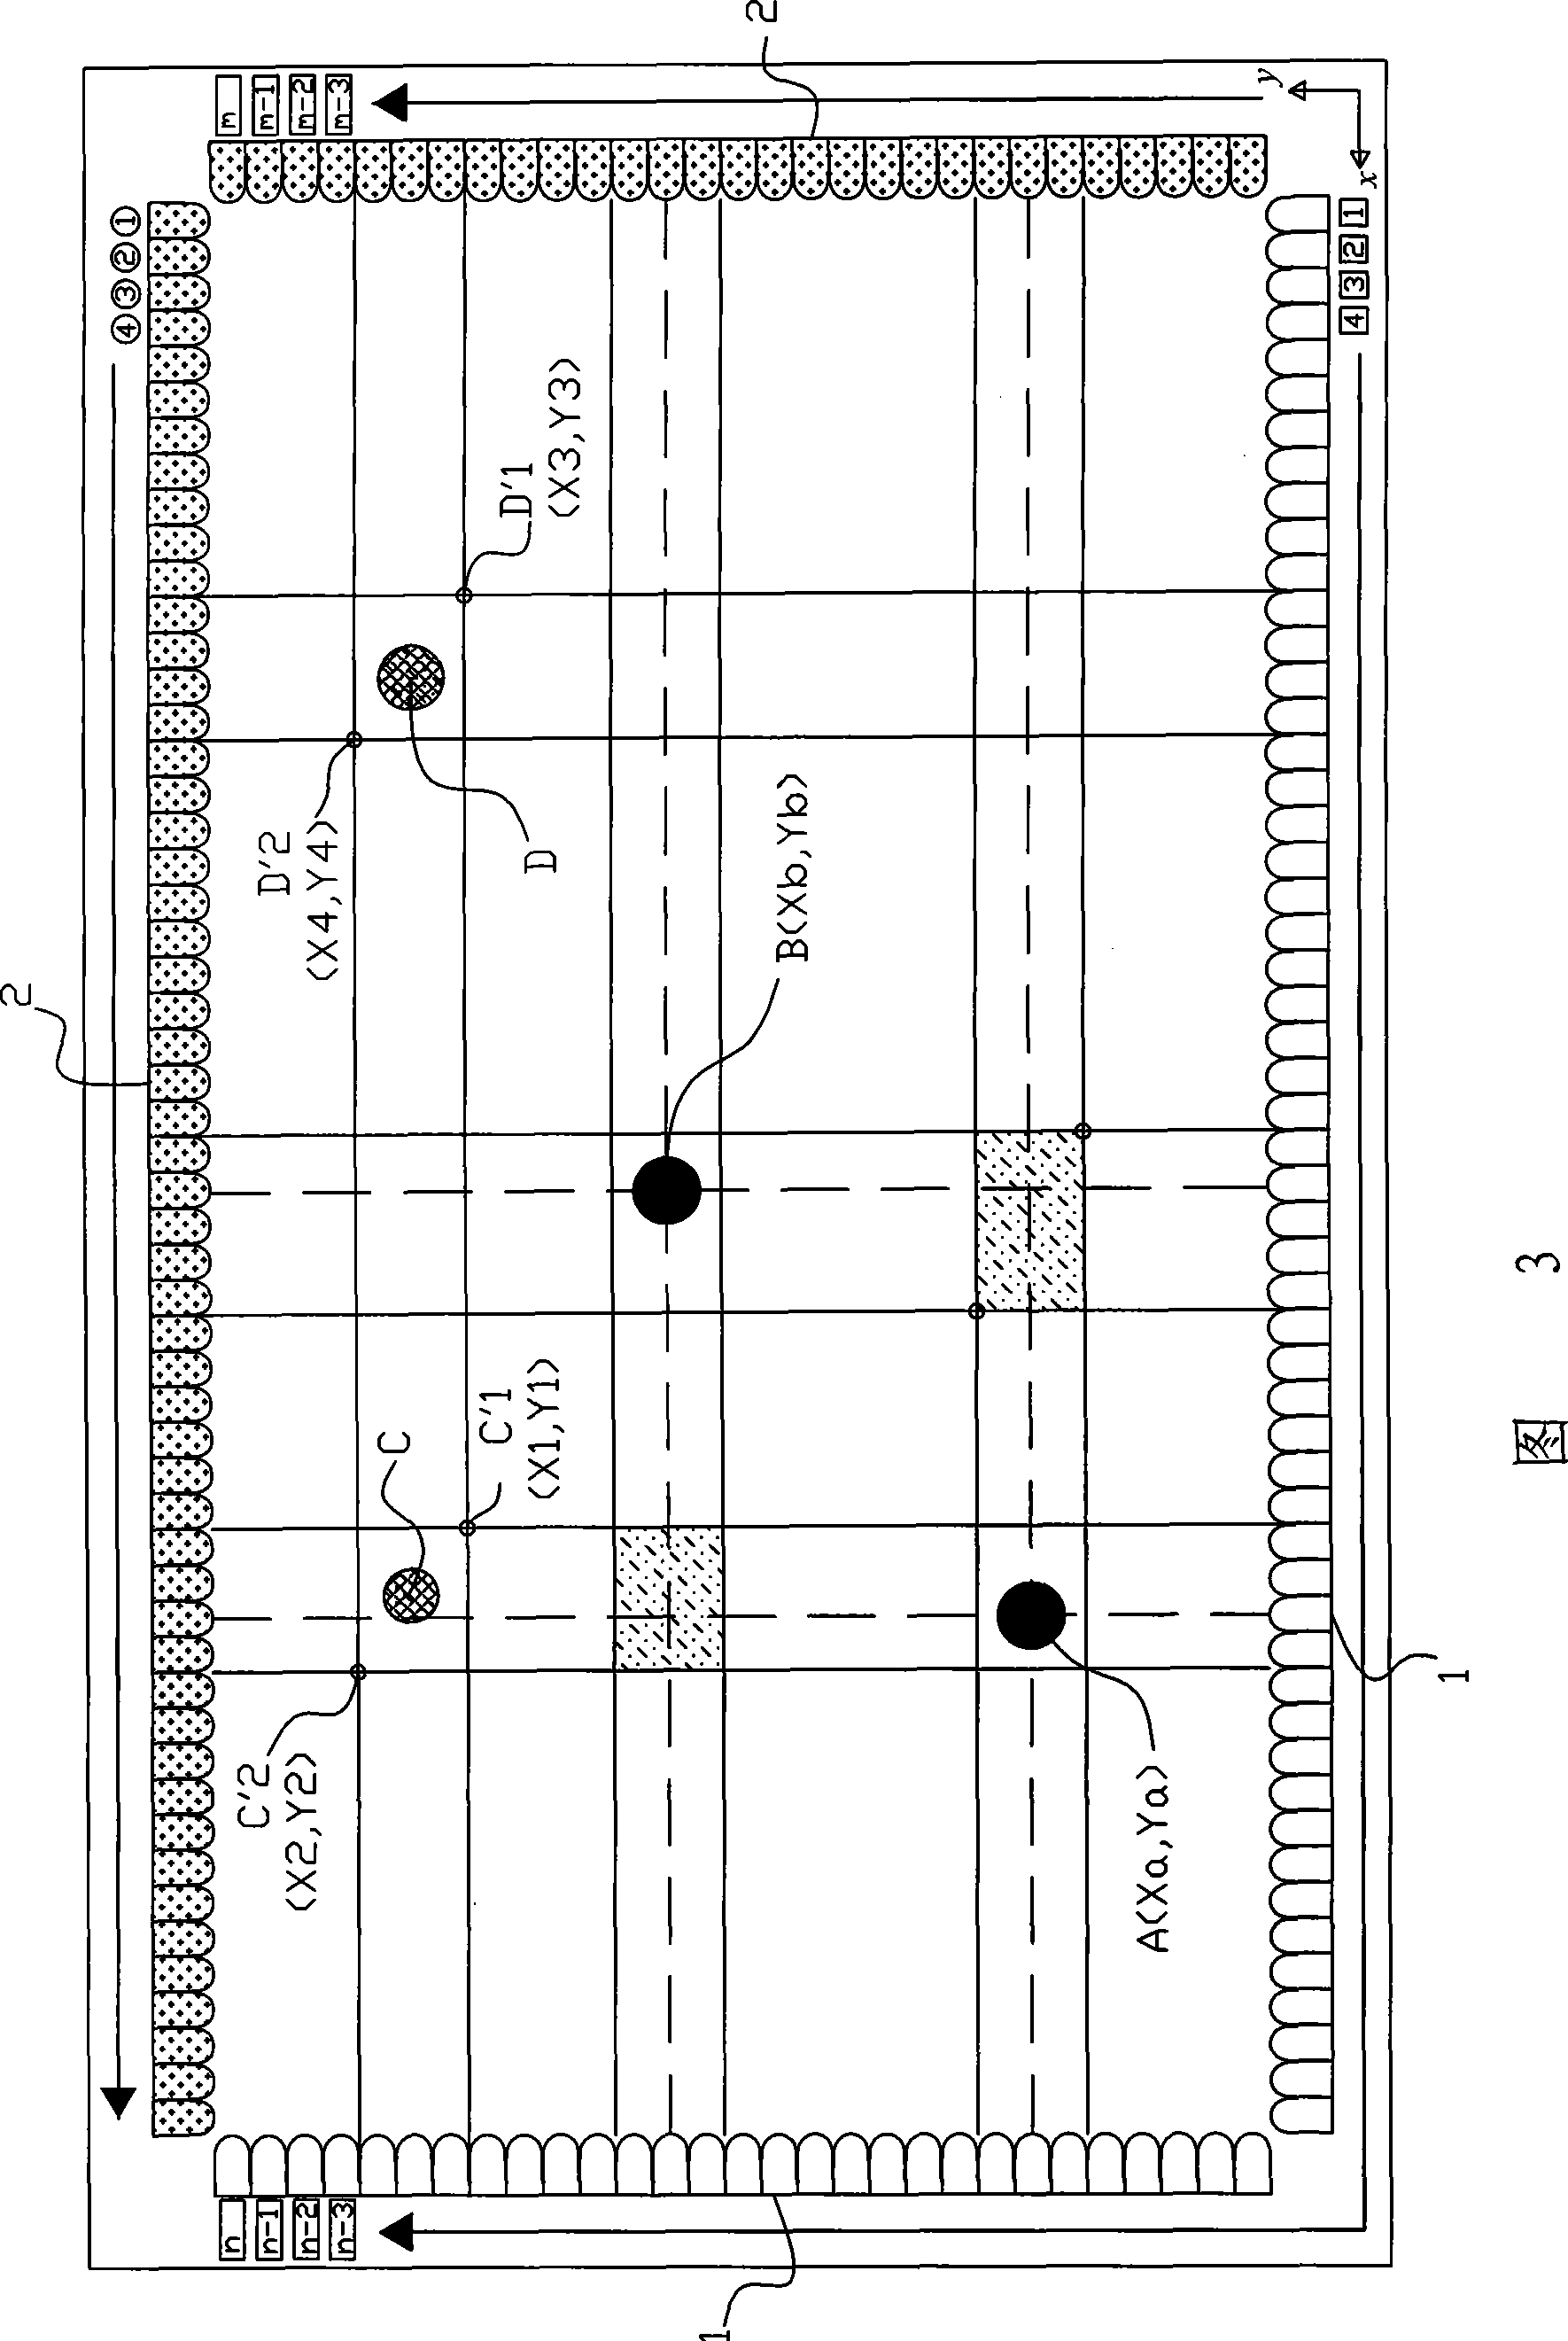 Infrared touch screen multi-point recognizing method